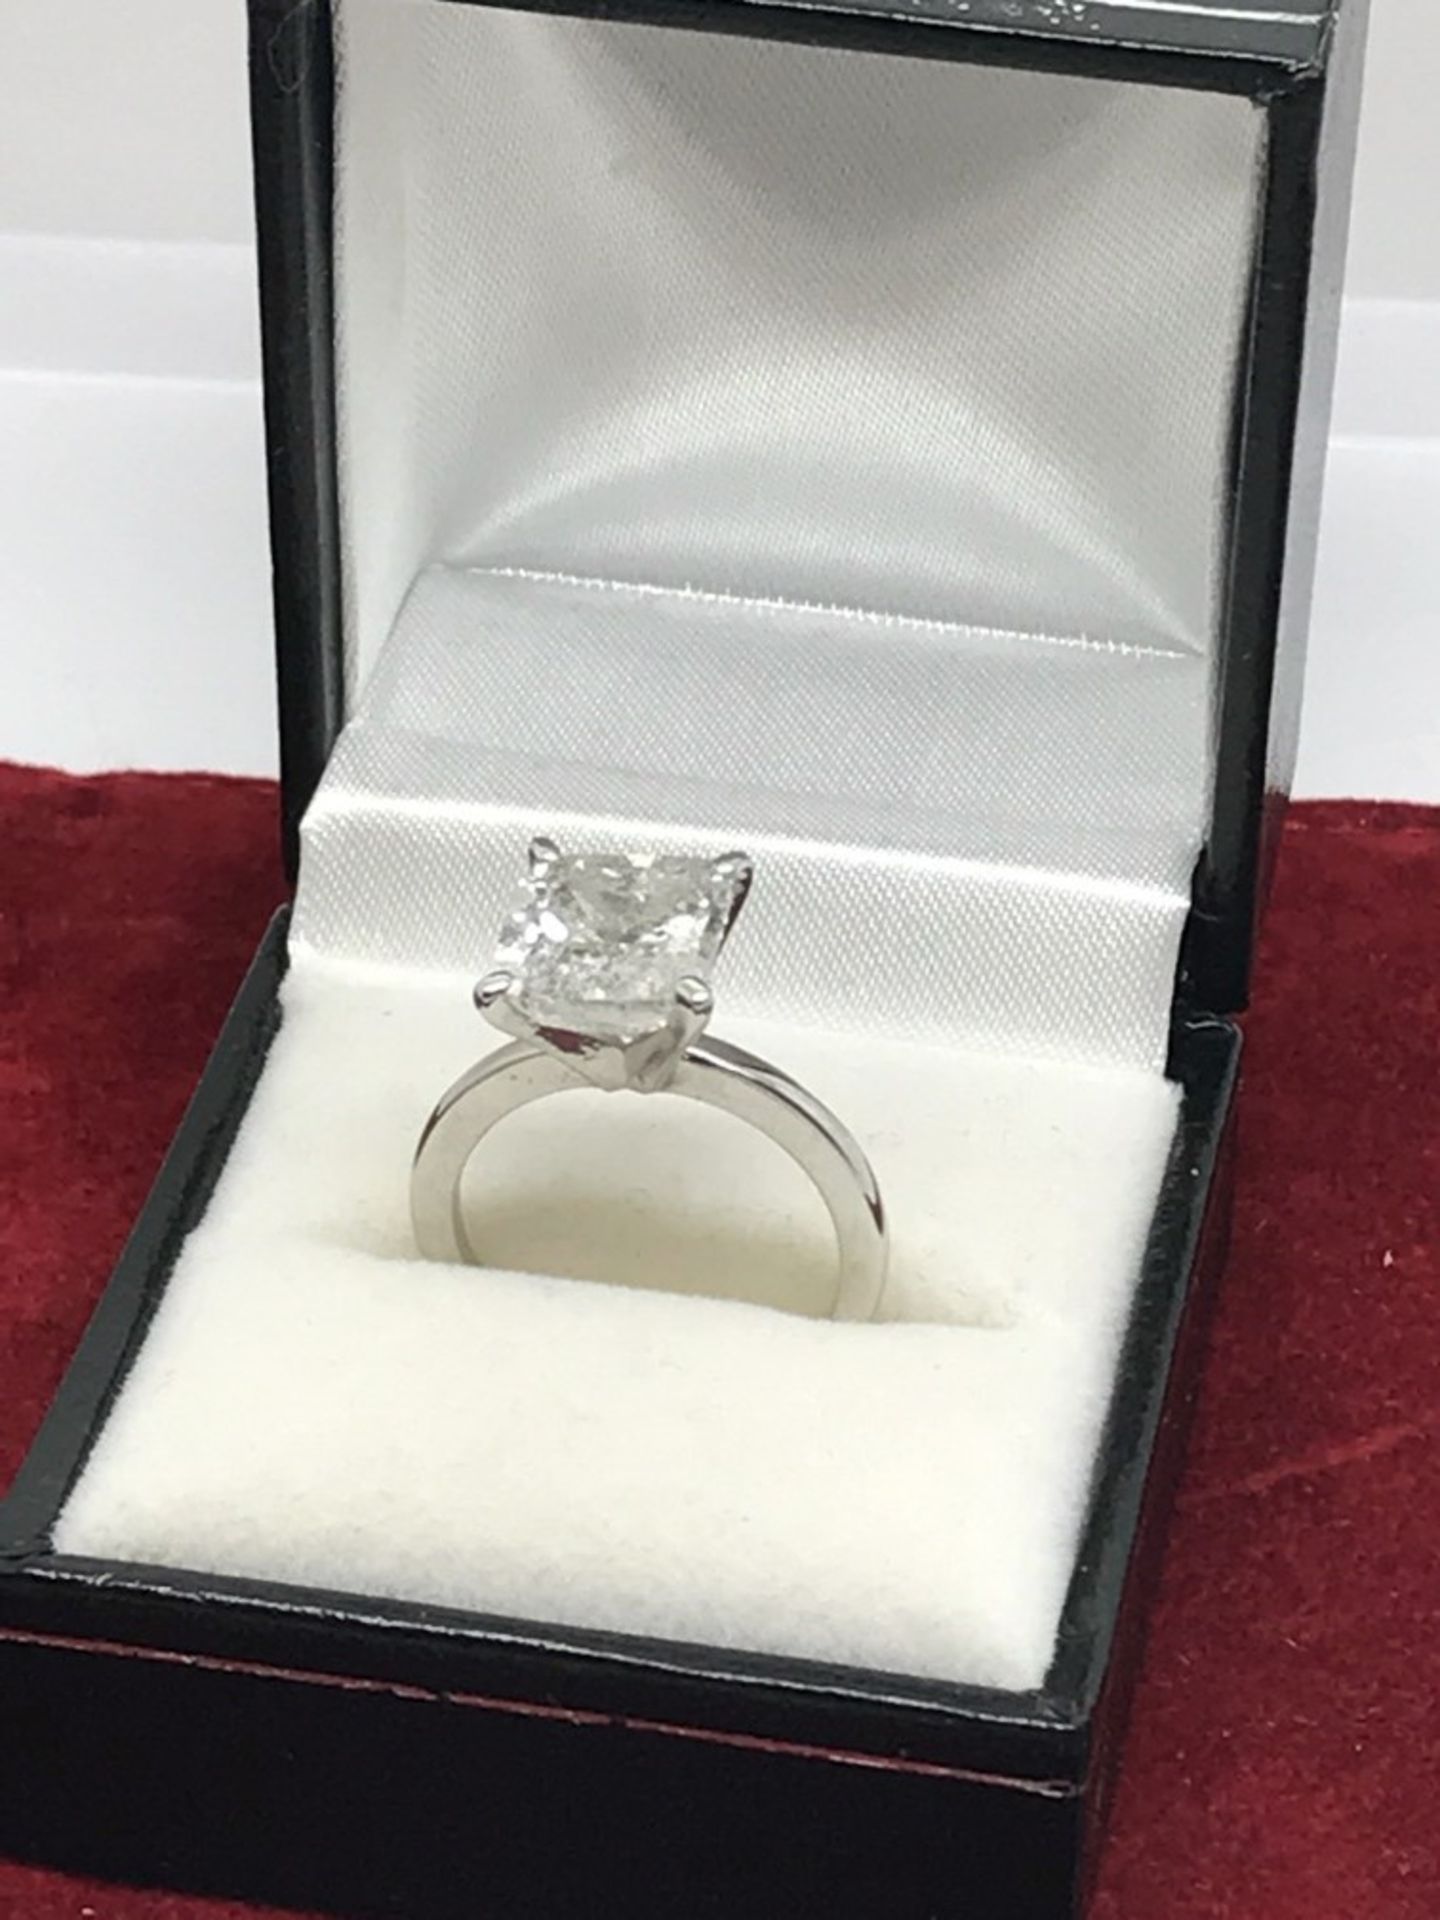 4.00ct PRINCESS CUT DIAMOND SOLITAIRE RING SET IN WHITE METAL TESTED AS 14ct GOLD